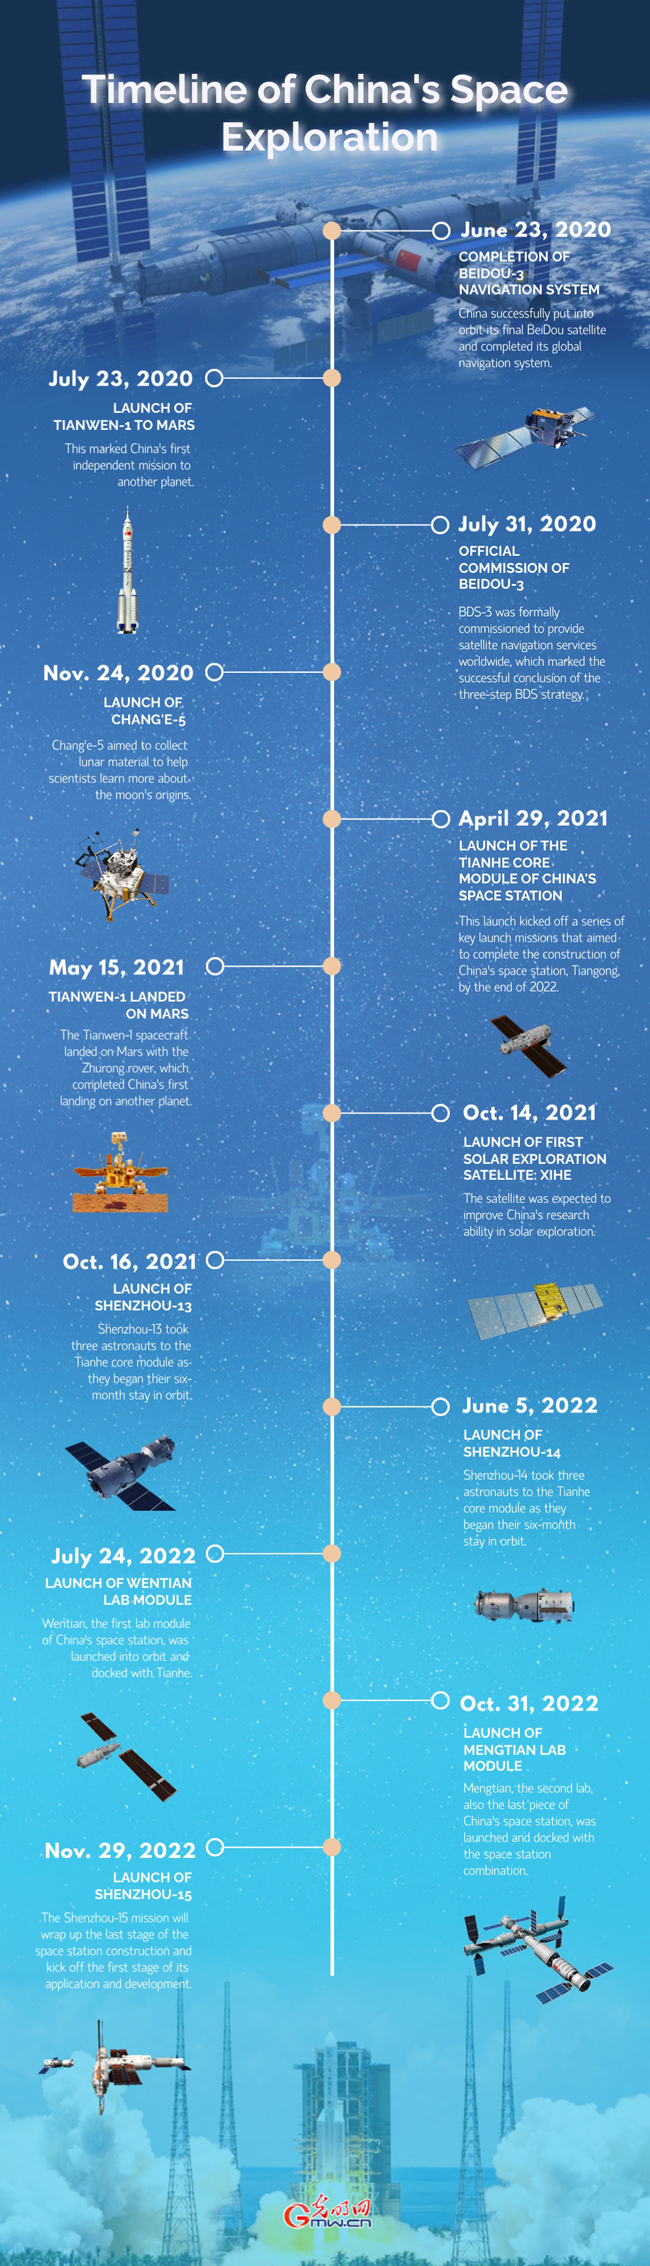 Timeline of China's Space Exploration